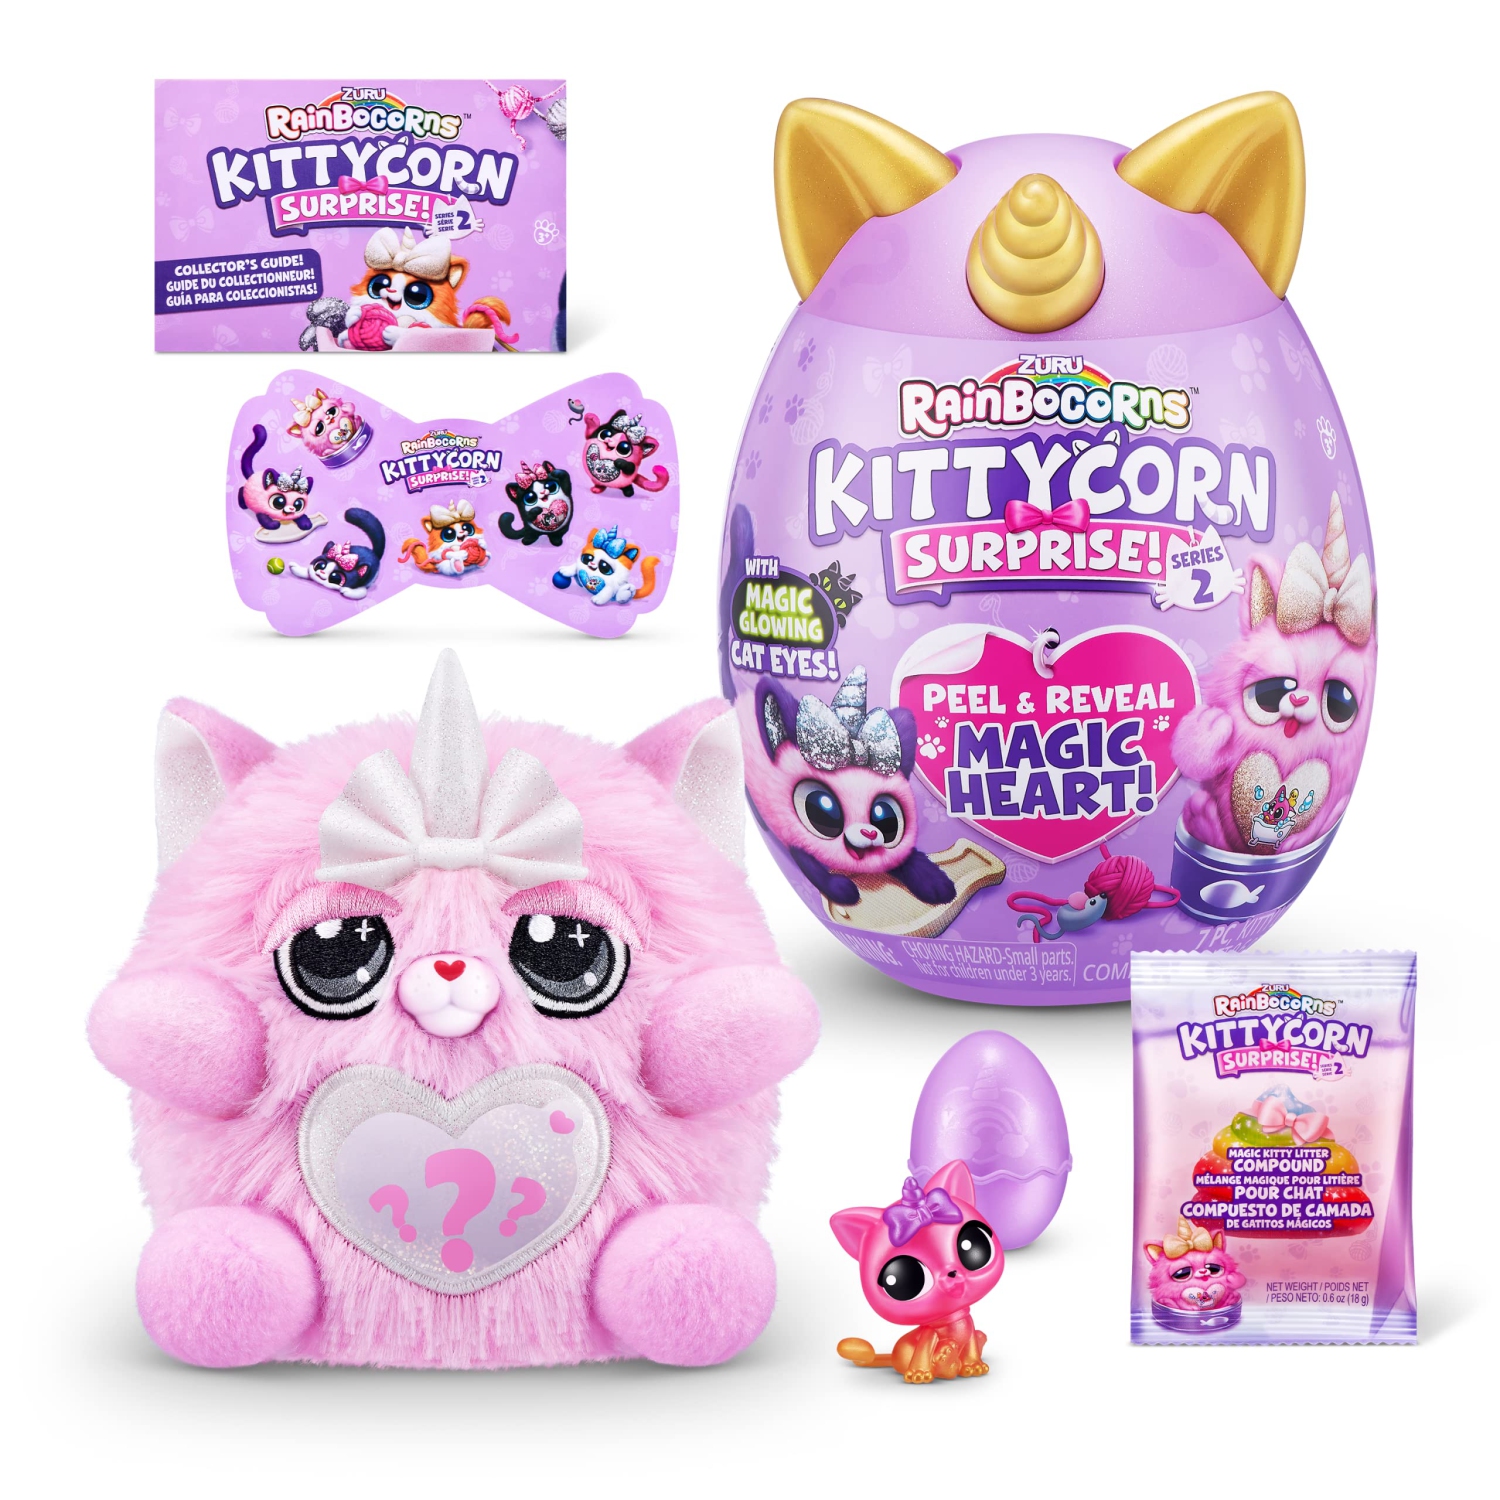 Kittycorn Surprise Series 2 Chinchilla Cat Plush Stuffed Animal with Surprise Egg, Sticker Pack, Slime - Ages 3+ for Girls